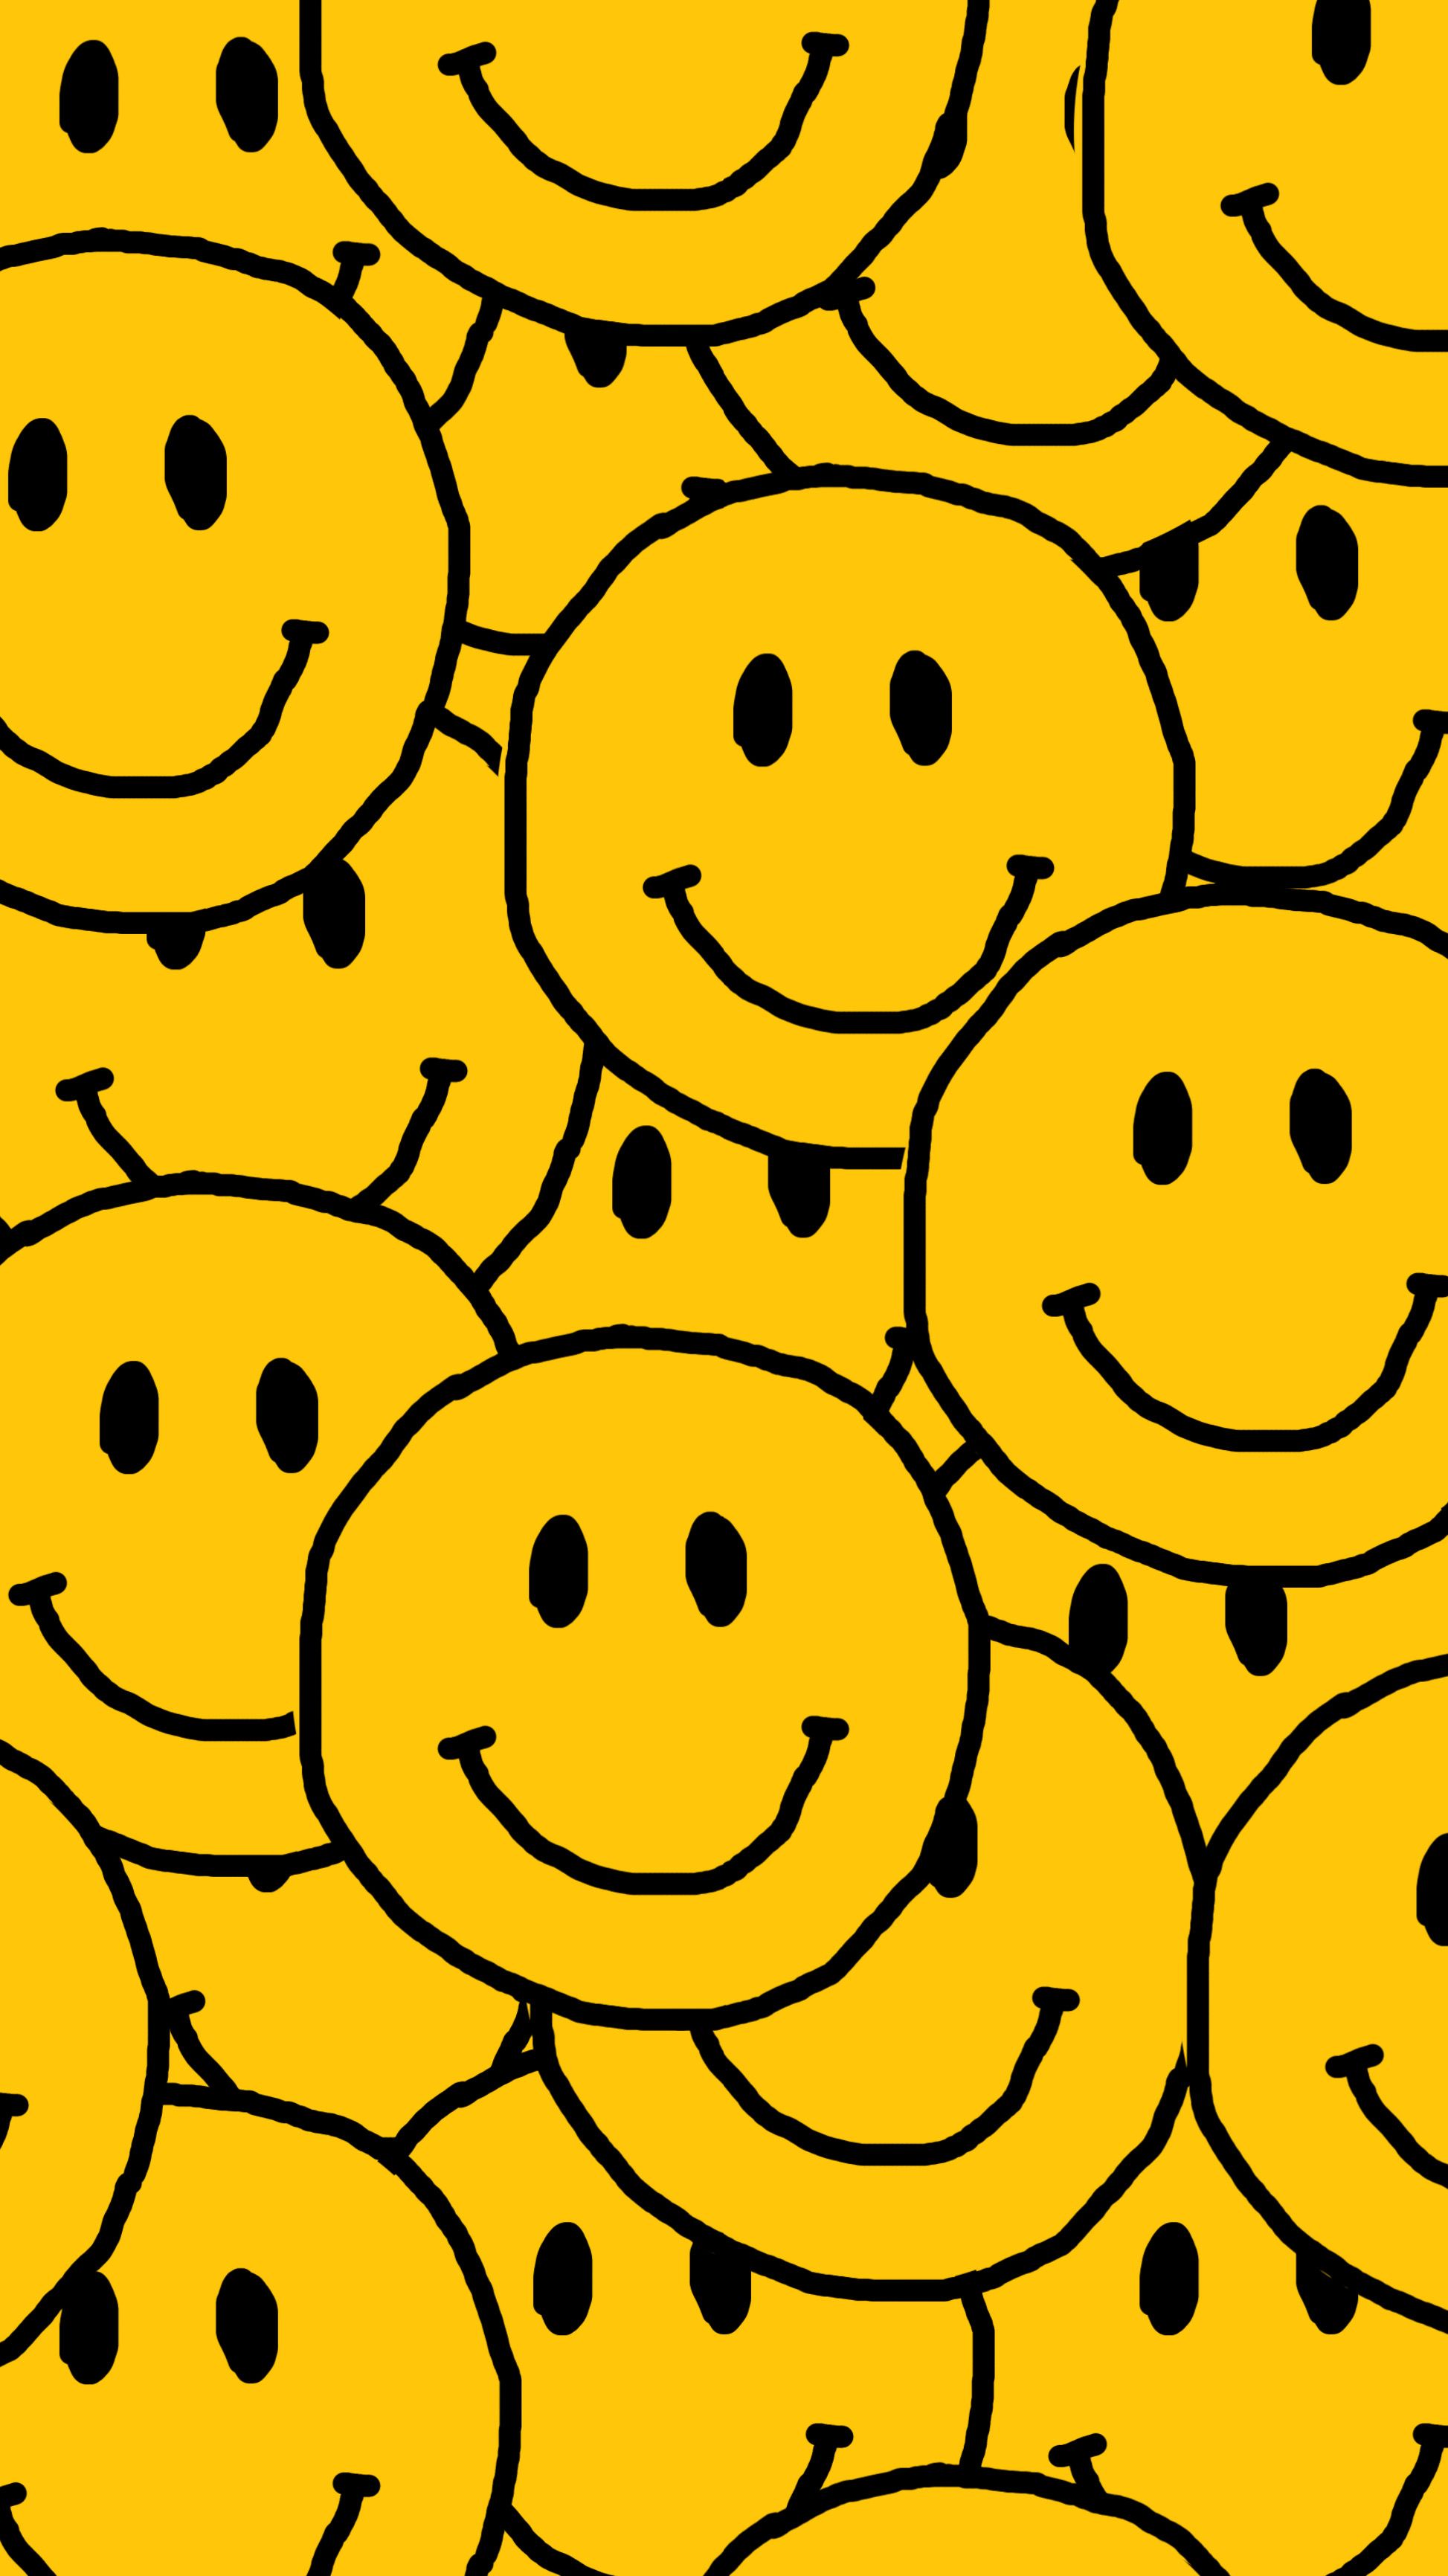 Smiley Face Abstract Wallpaper  Aesthetic Smiley Face Wallpaper iPhone